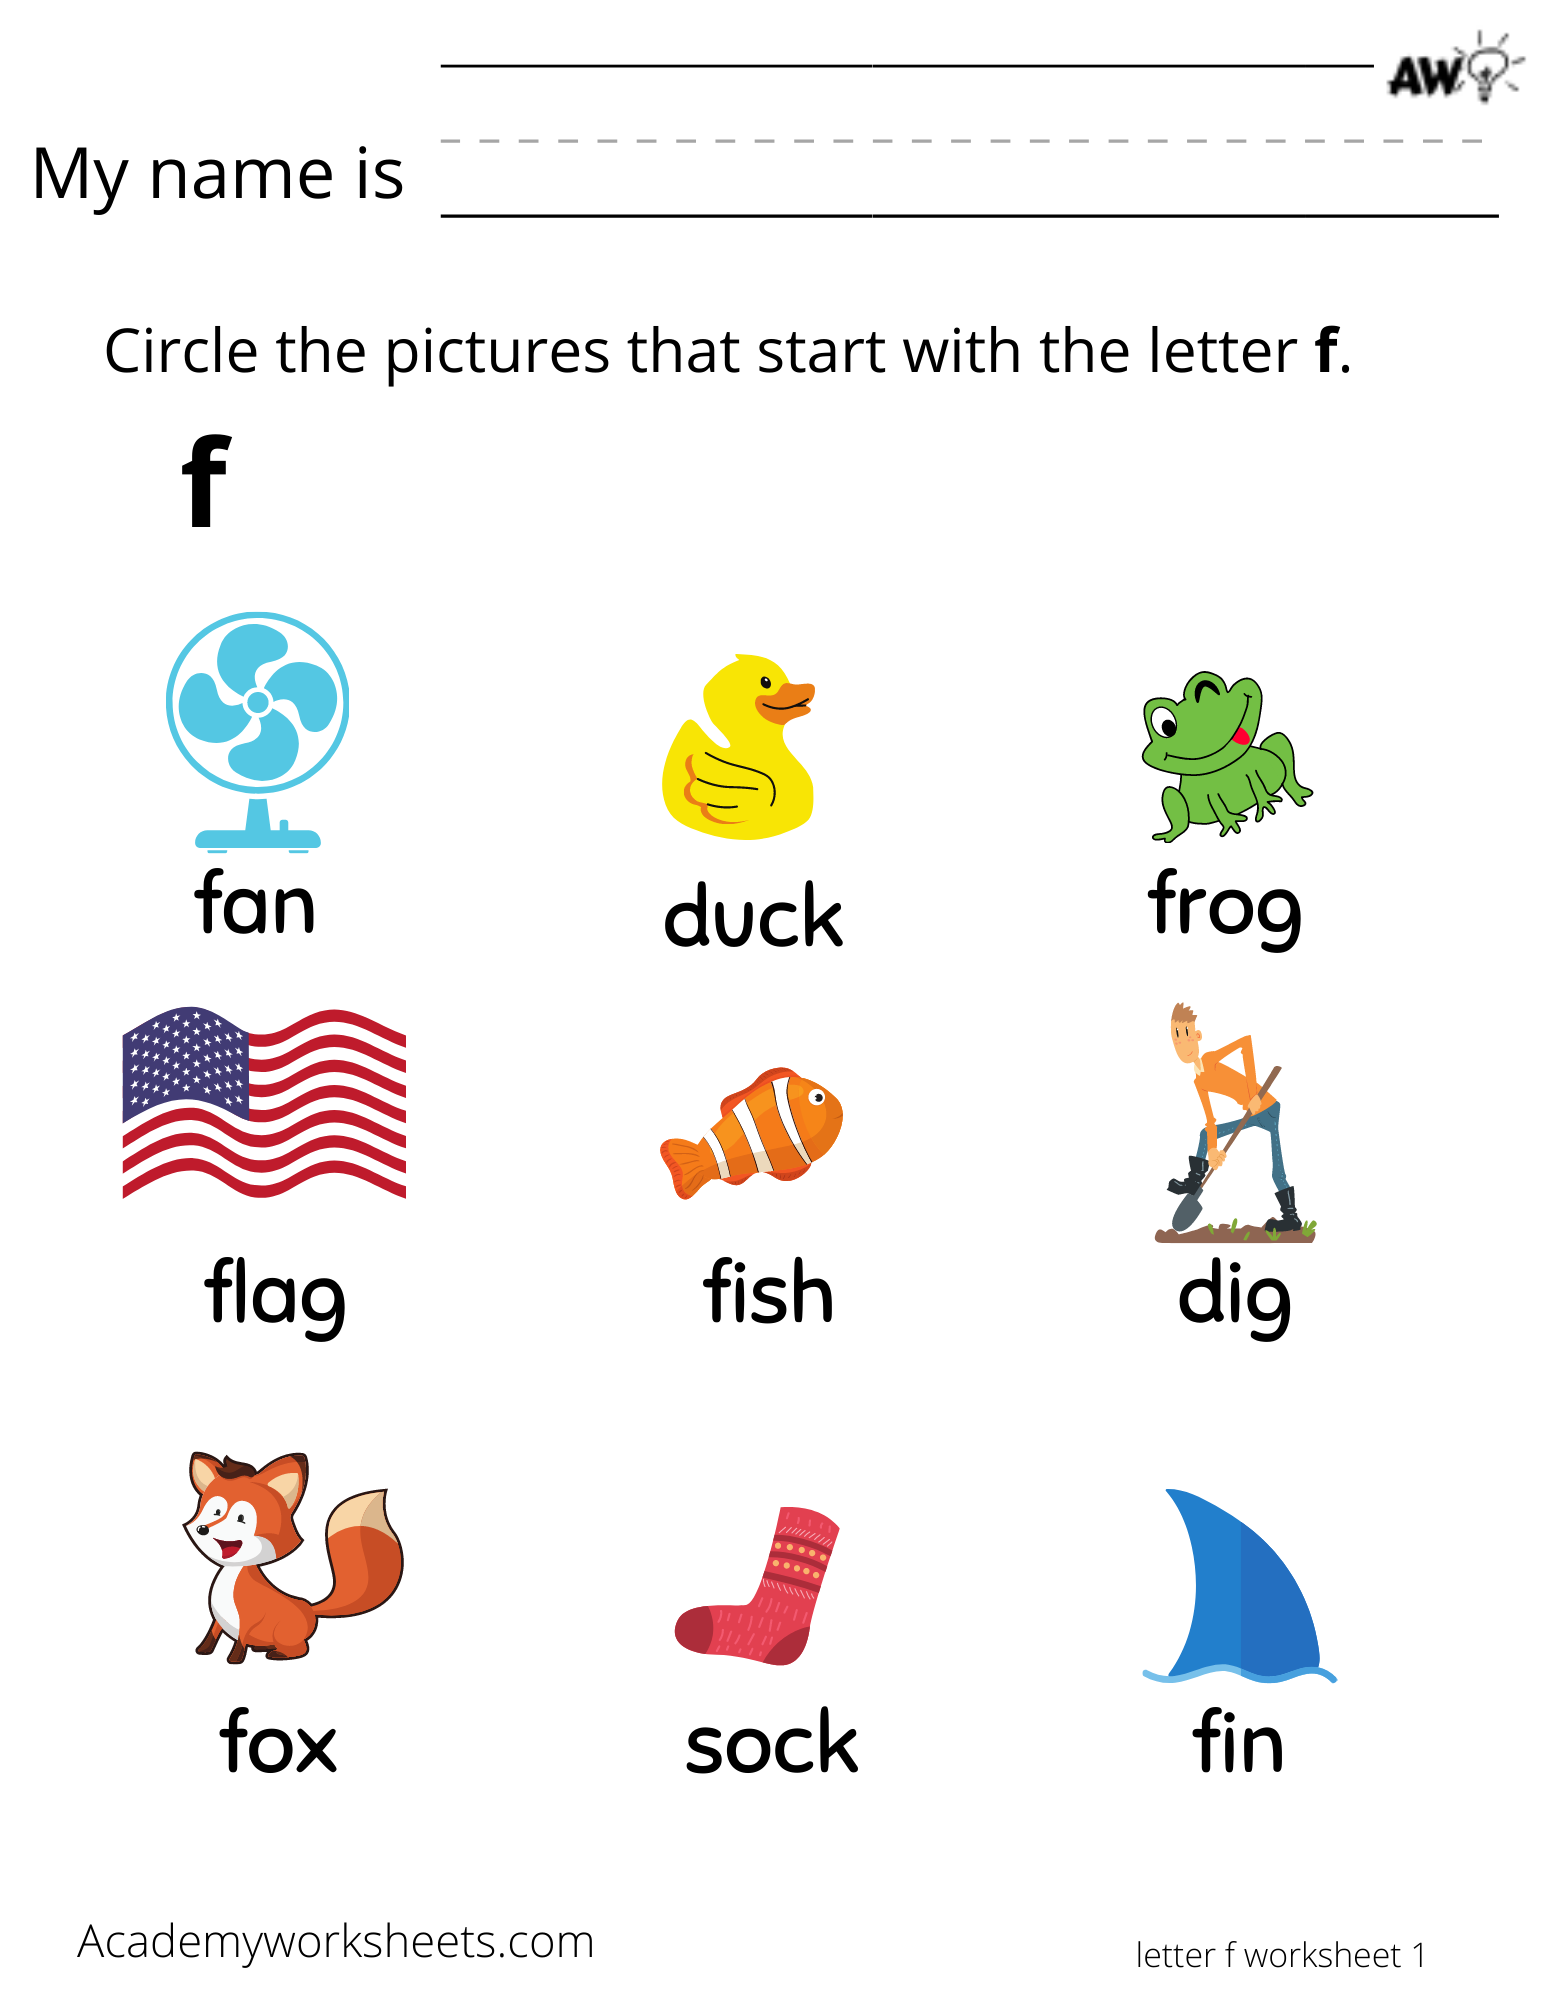 learn-the-letter-f-f-learning-the-alphabet-academy-worksheets